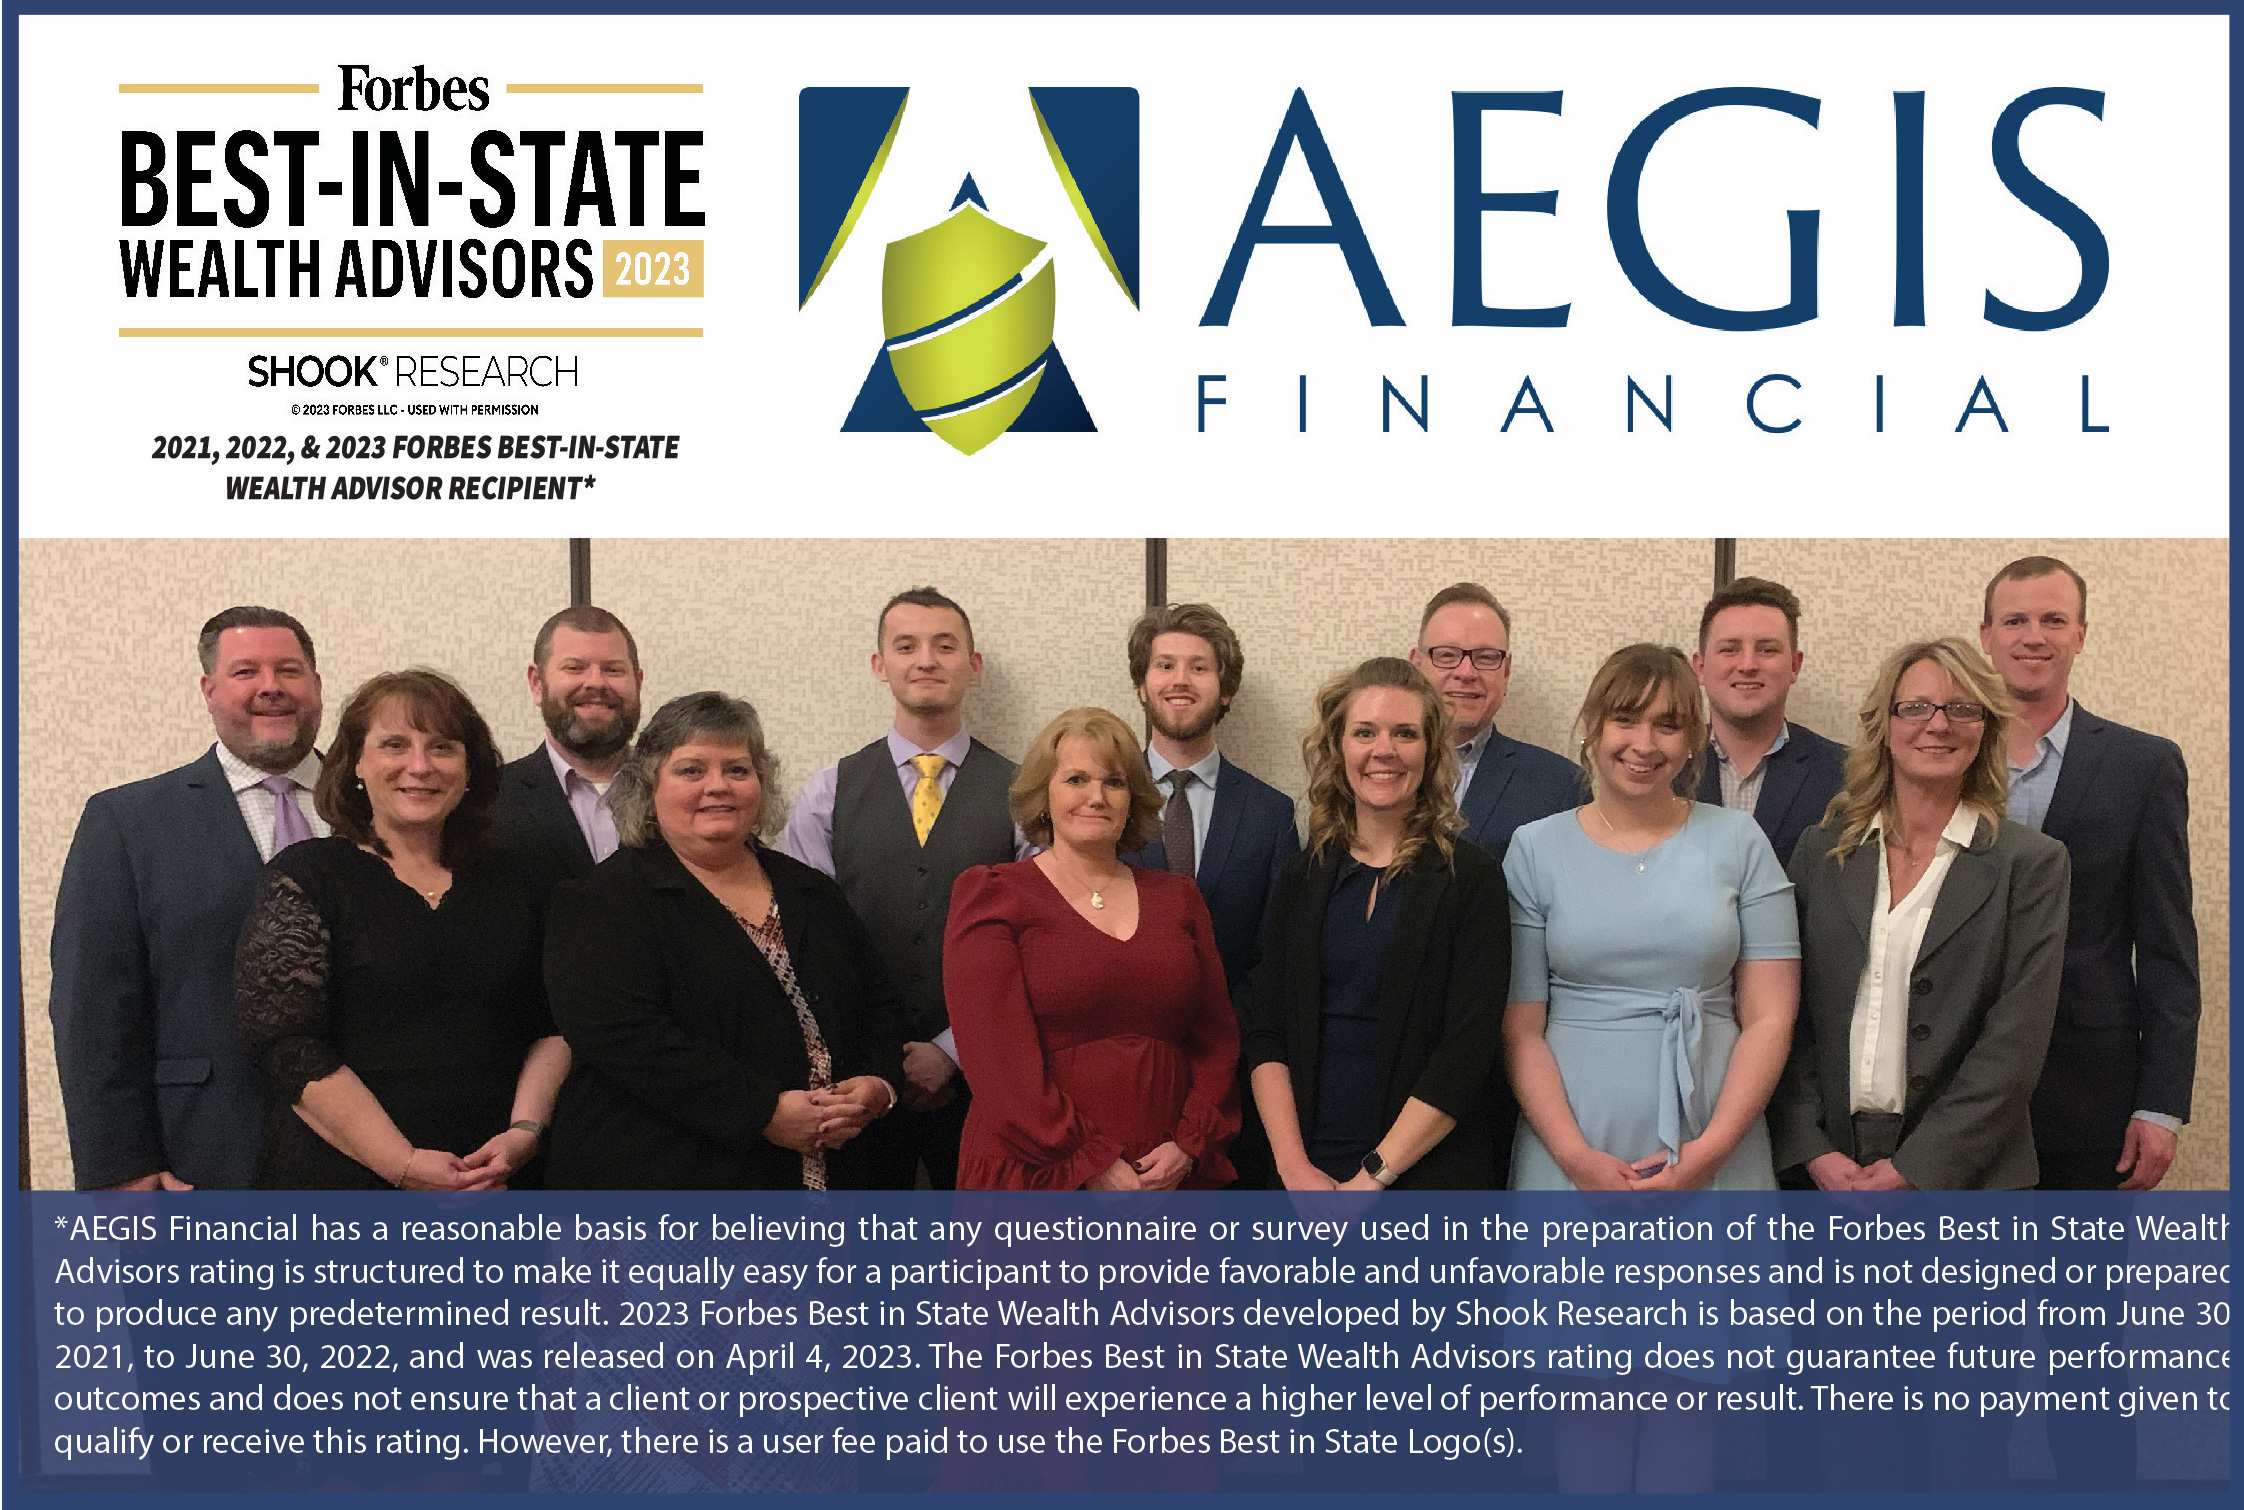 What’s New at AEGIS Financial